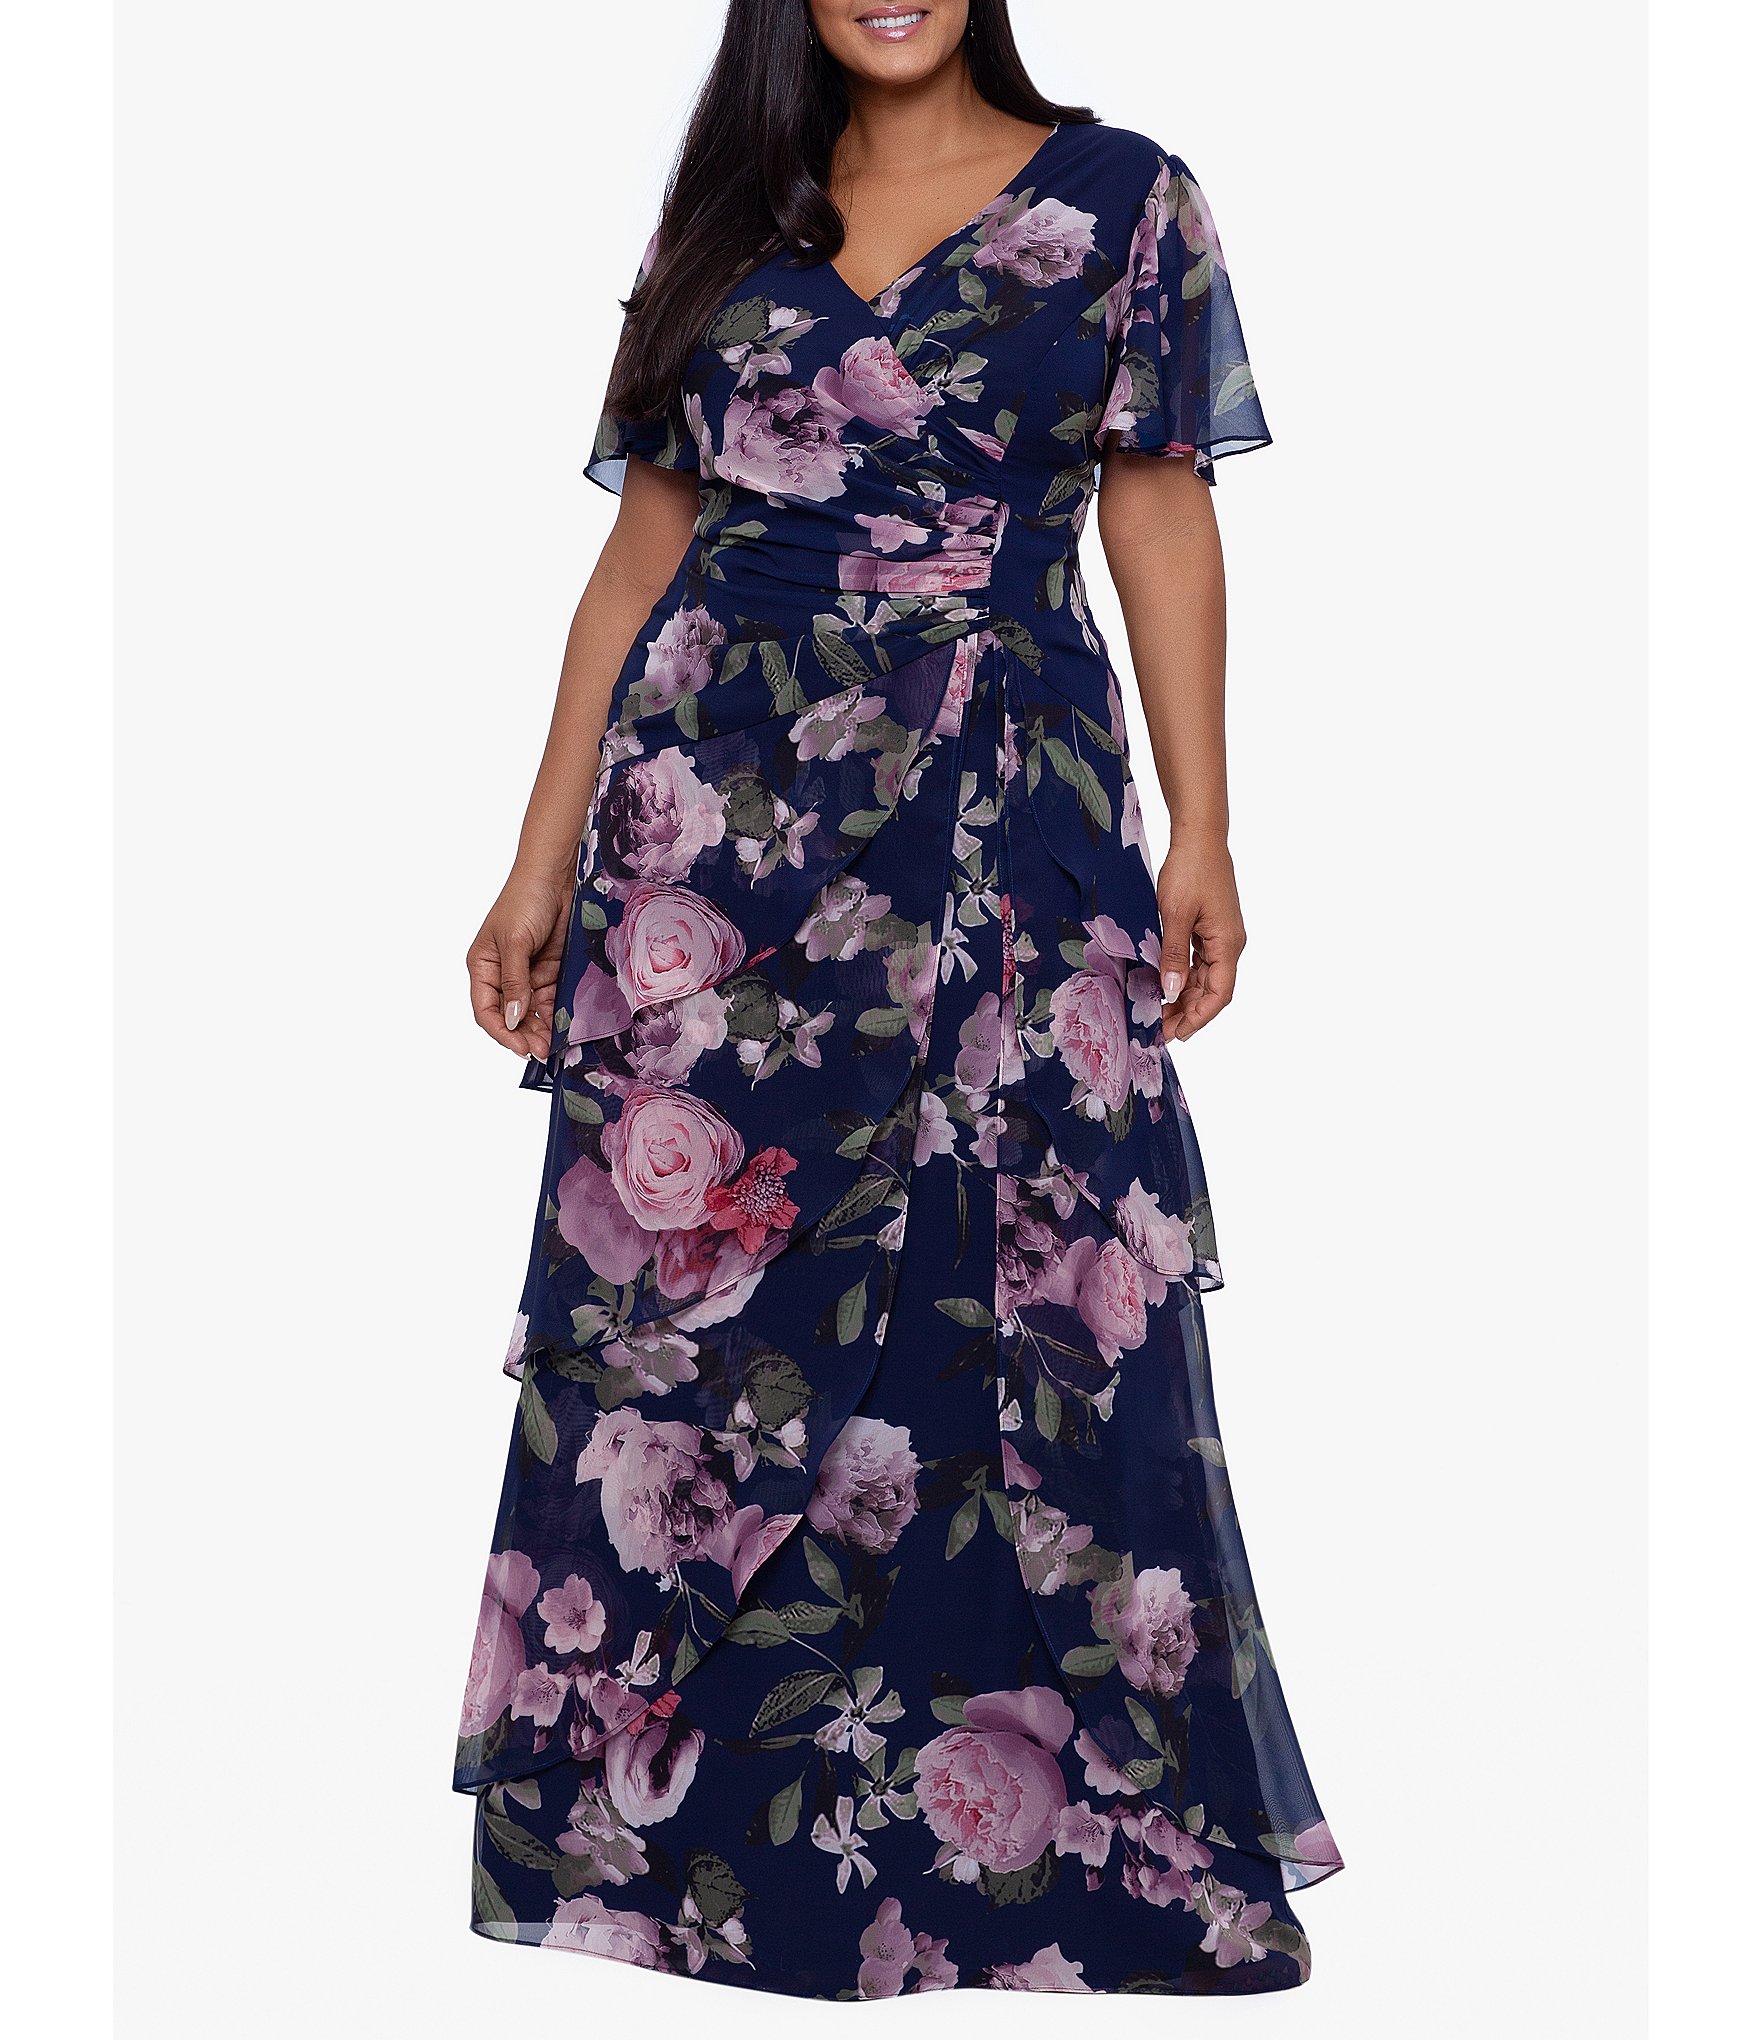 Xscape Plus Size Floral Print Short Sleeve Surplice V Neck Ruched Chiffon Tiered Gown Dillard S